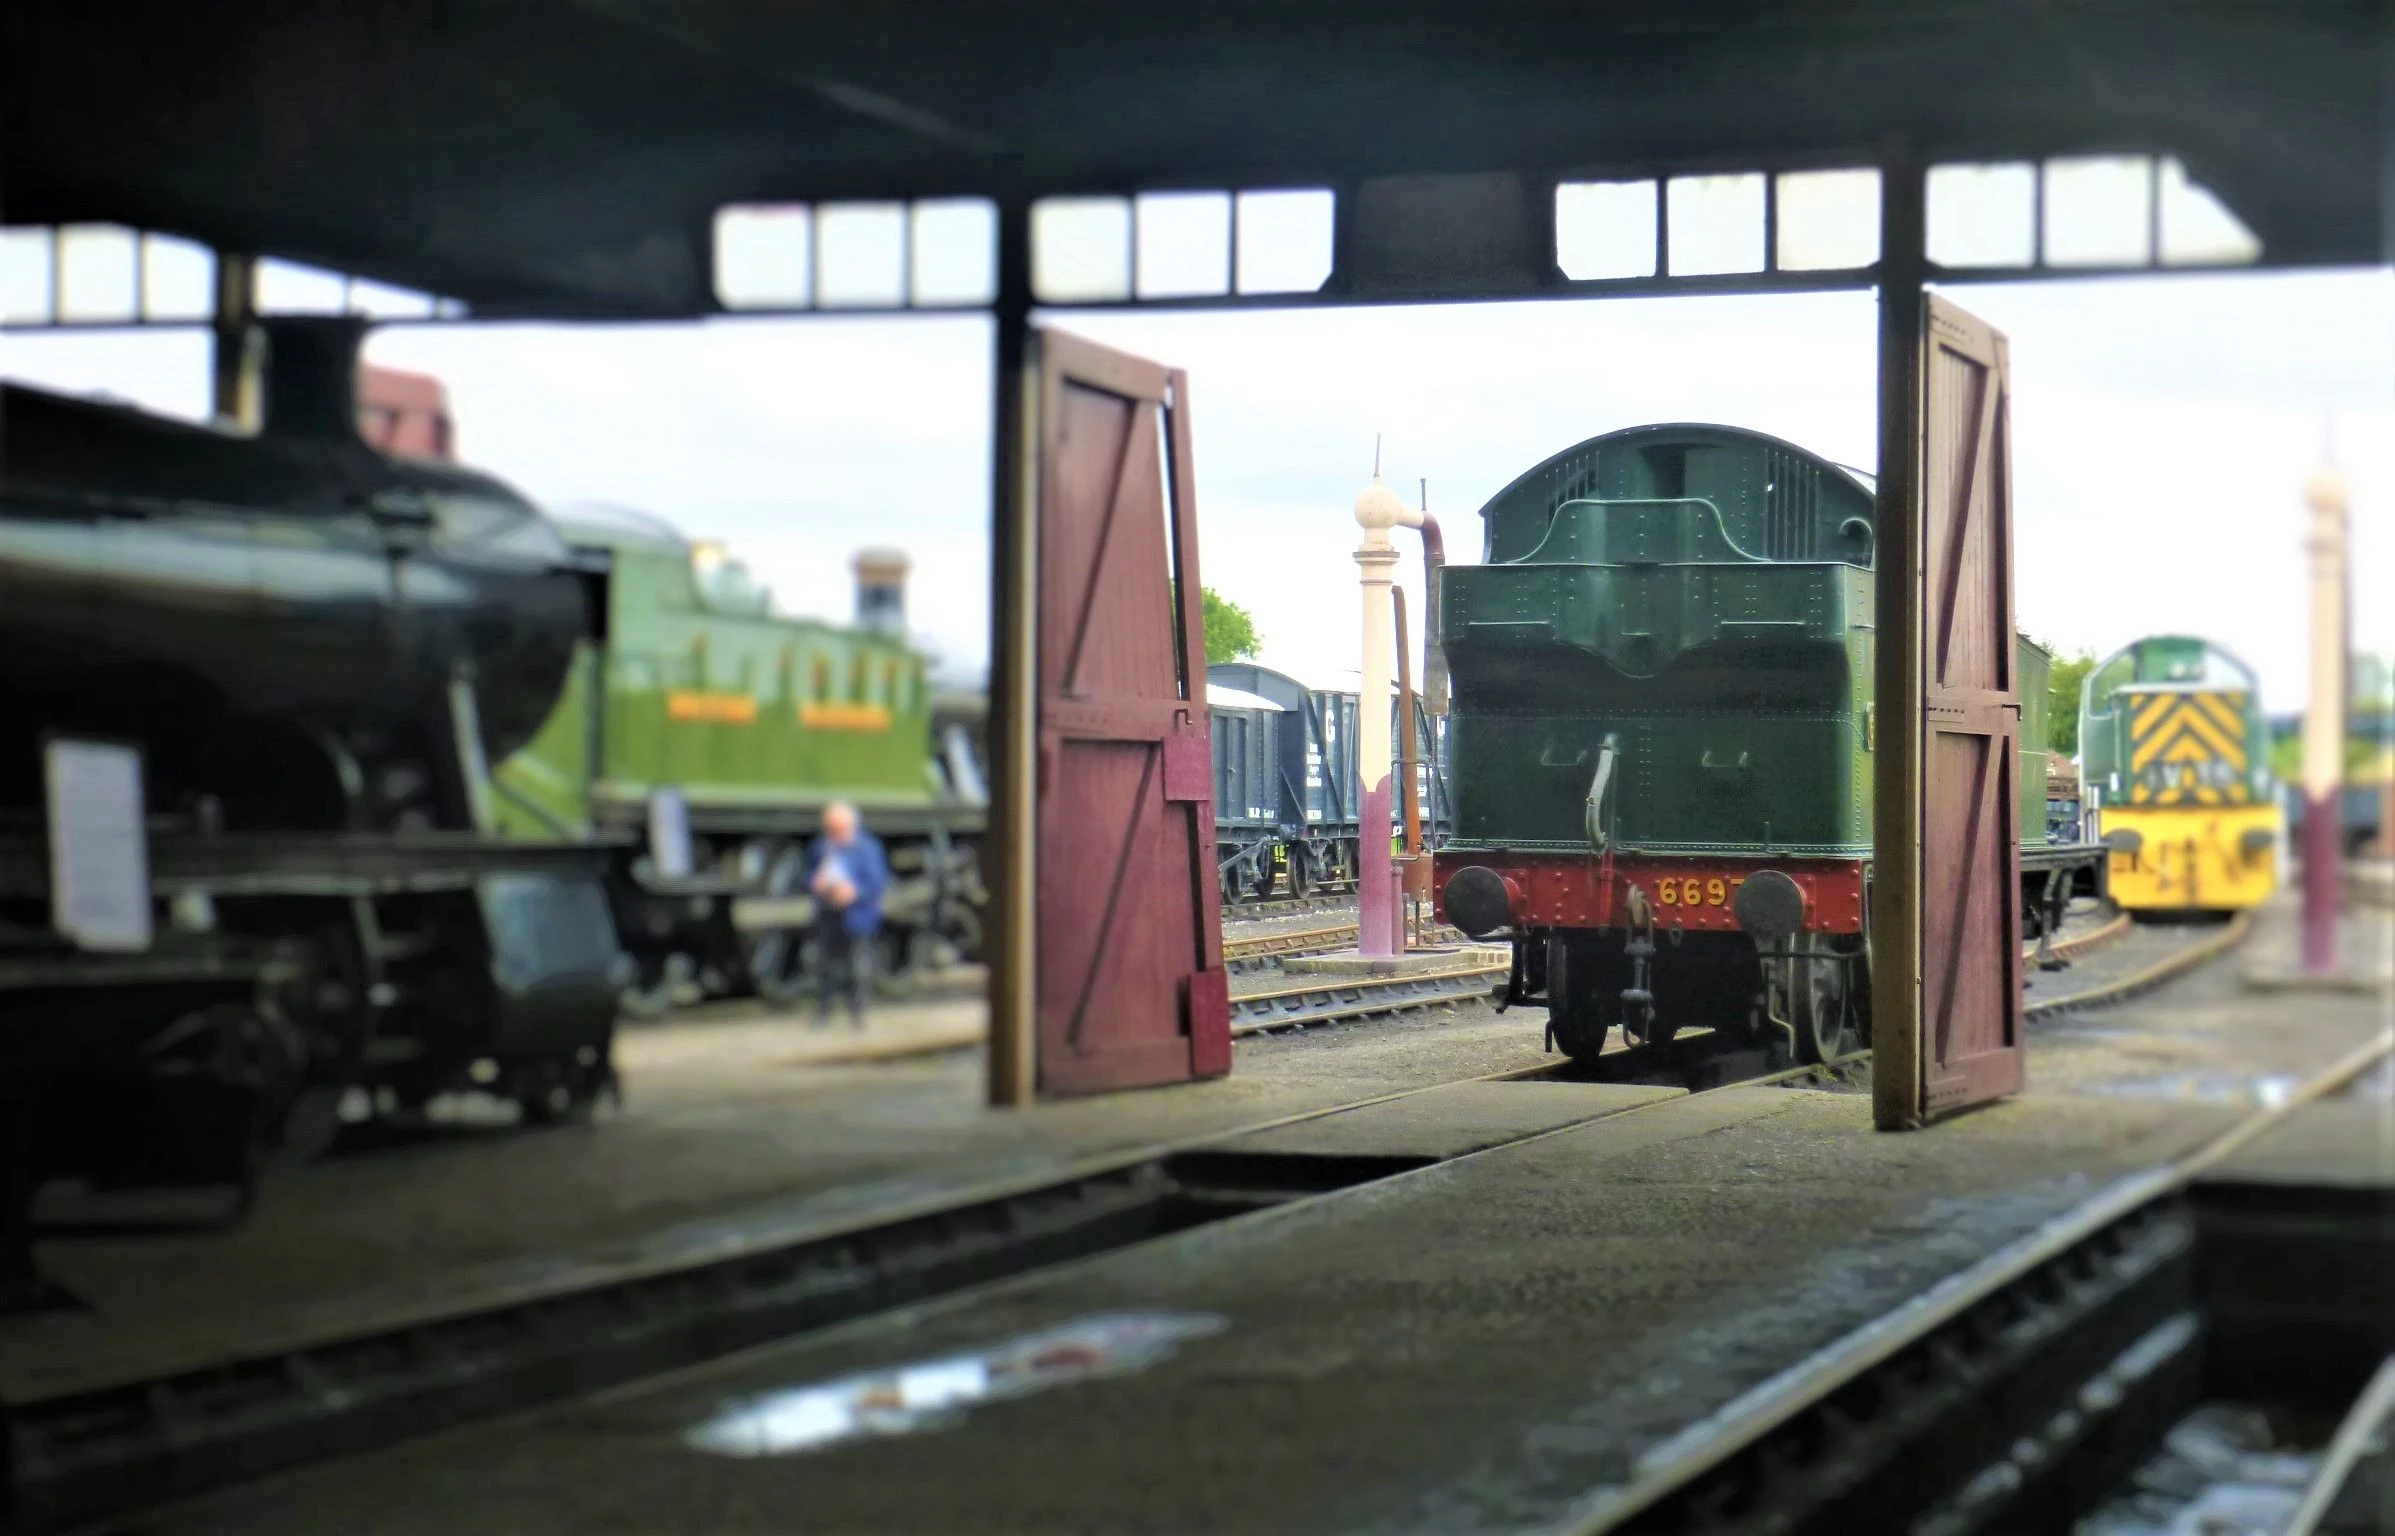 Steam train fans will love a day out to Didcot Railway centre